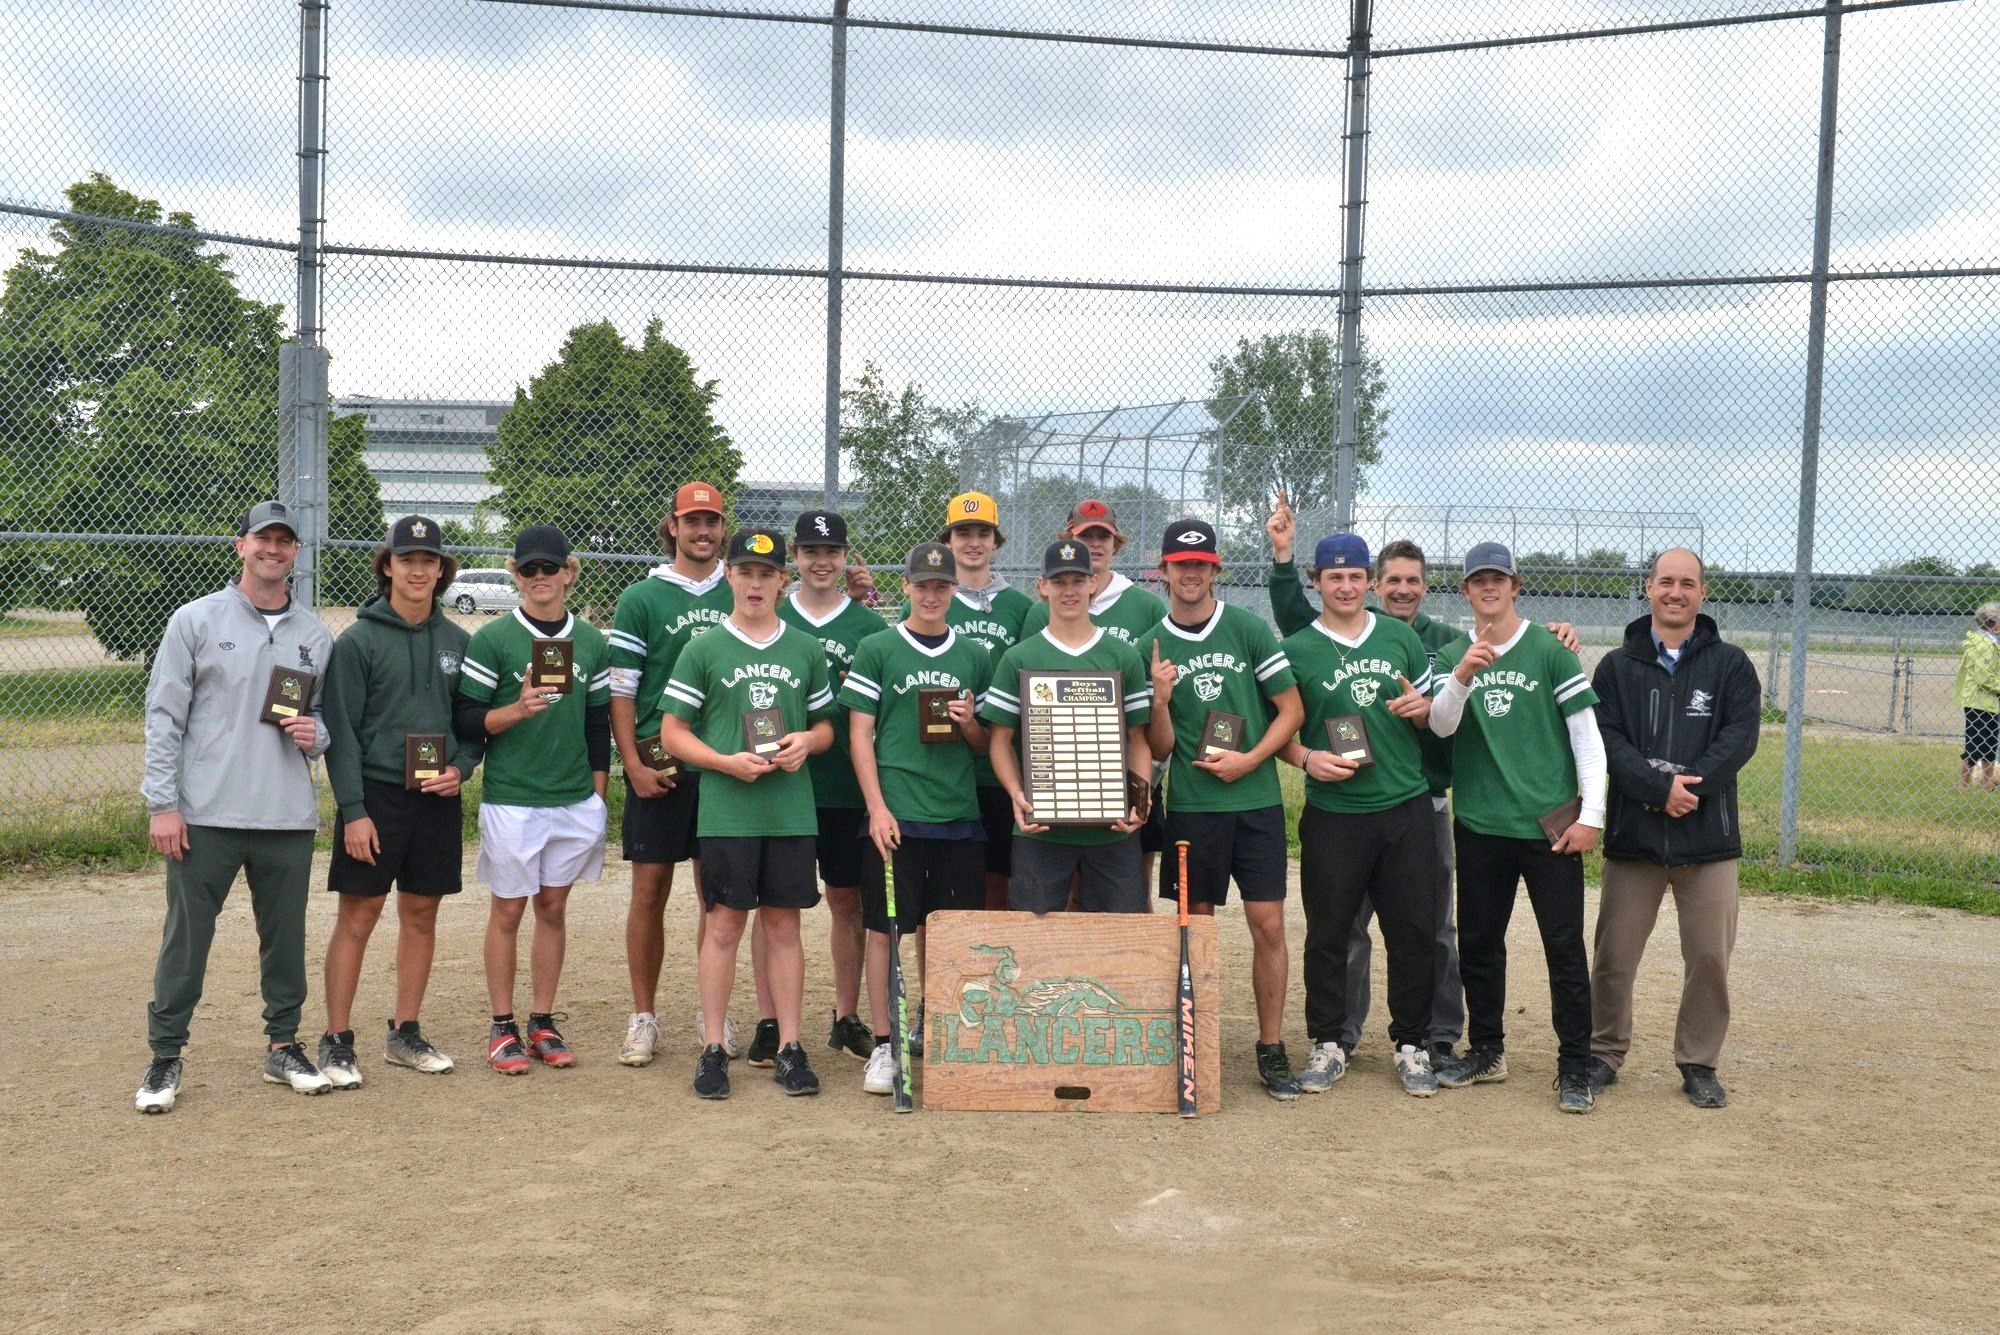                      EDSS boys’ slo-pitch team claims WCSSAA title in final                             
                     